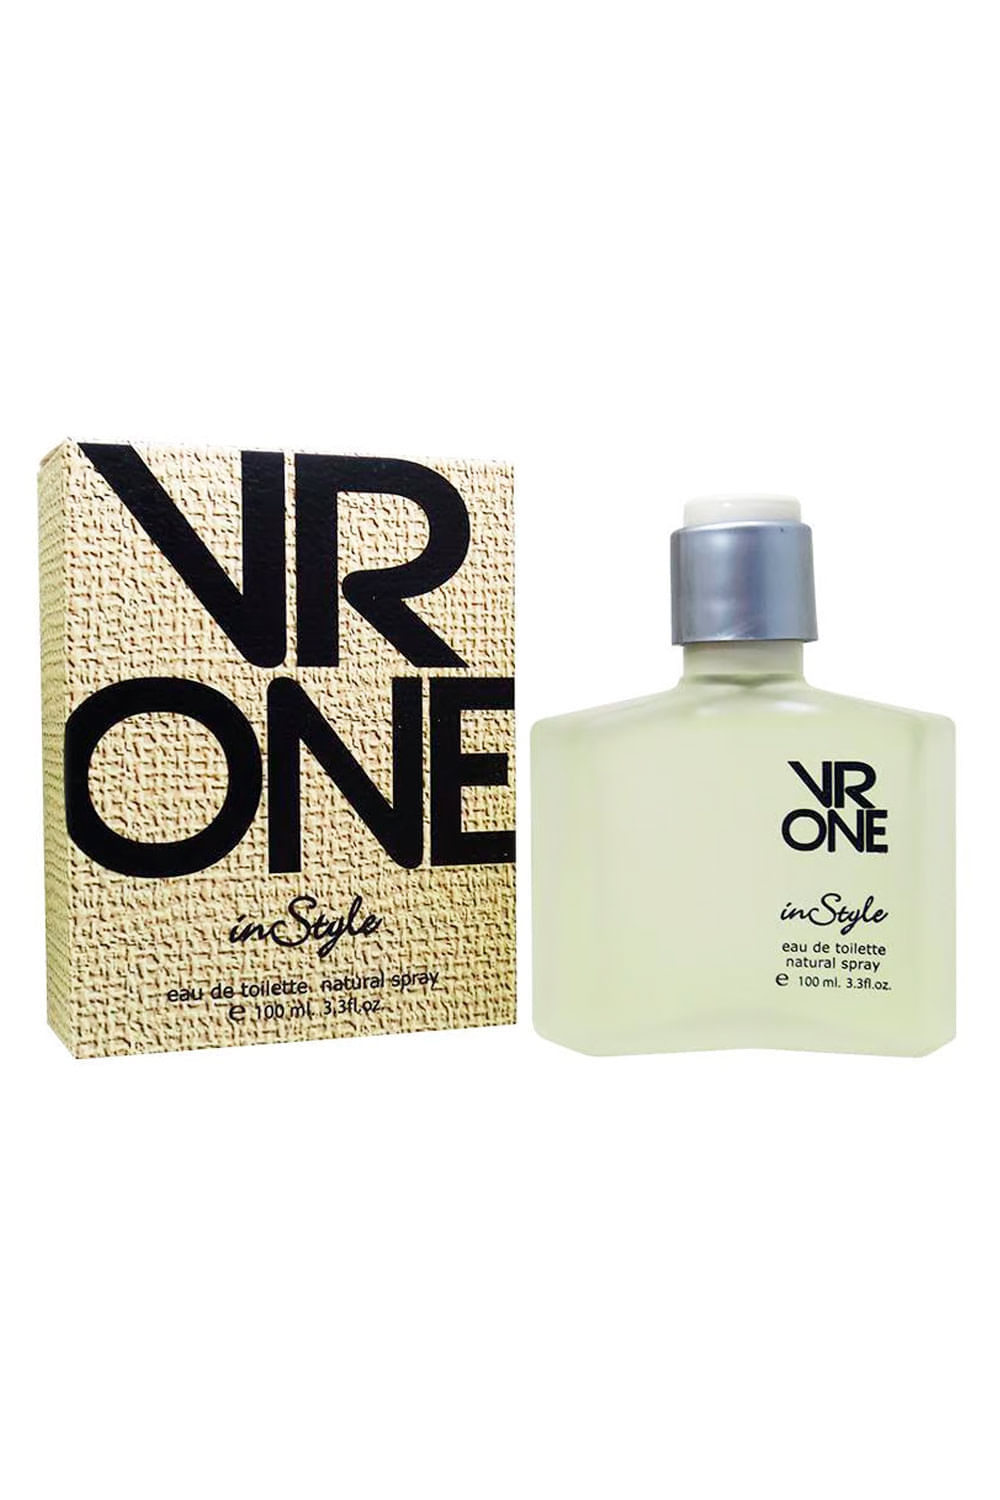 PERFUME HOMBRE VR ONE